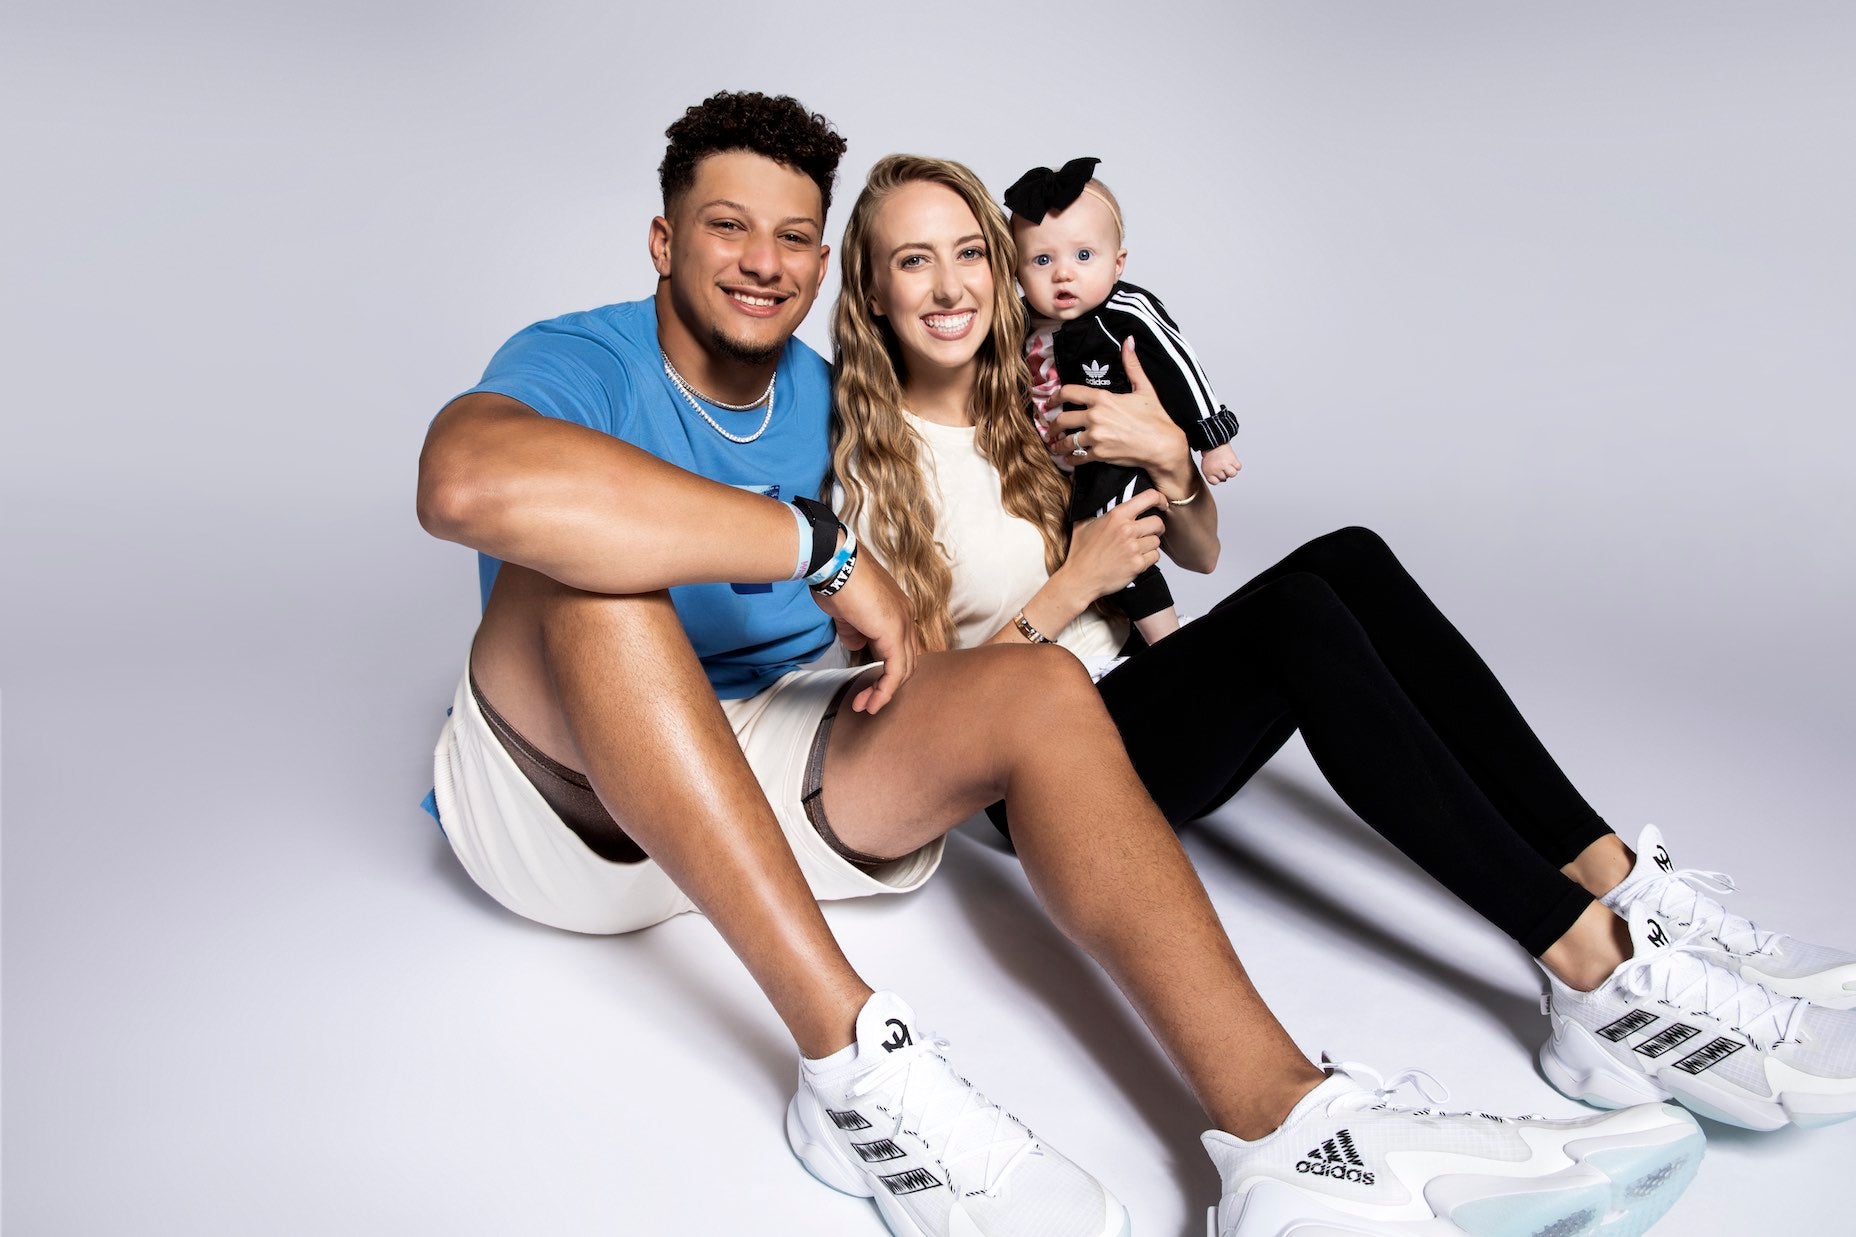 Patrick Mahomes, Going Deep Why the NFL's best QB needs golf